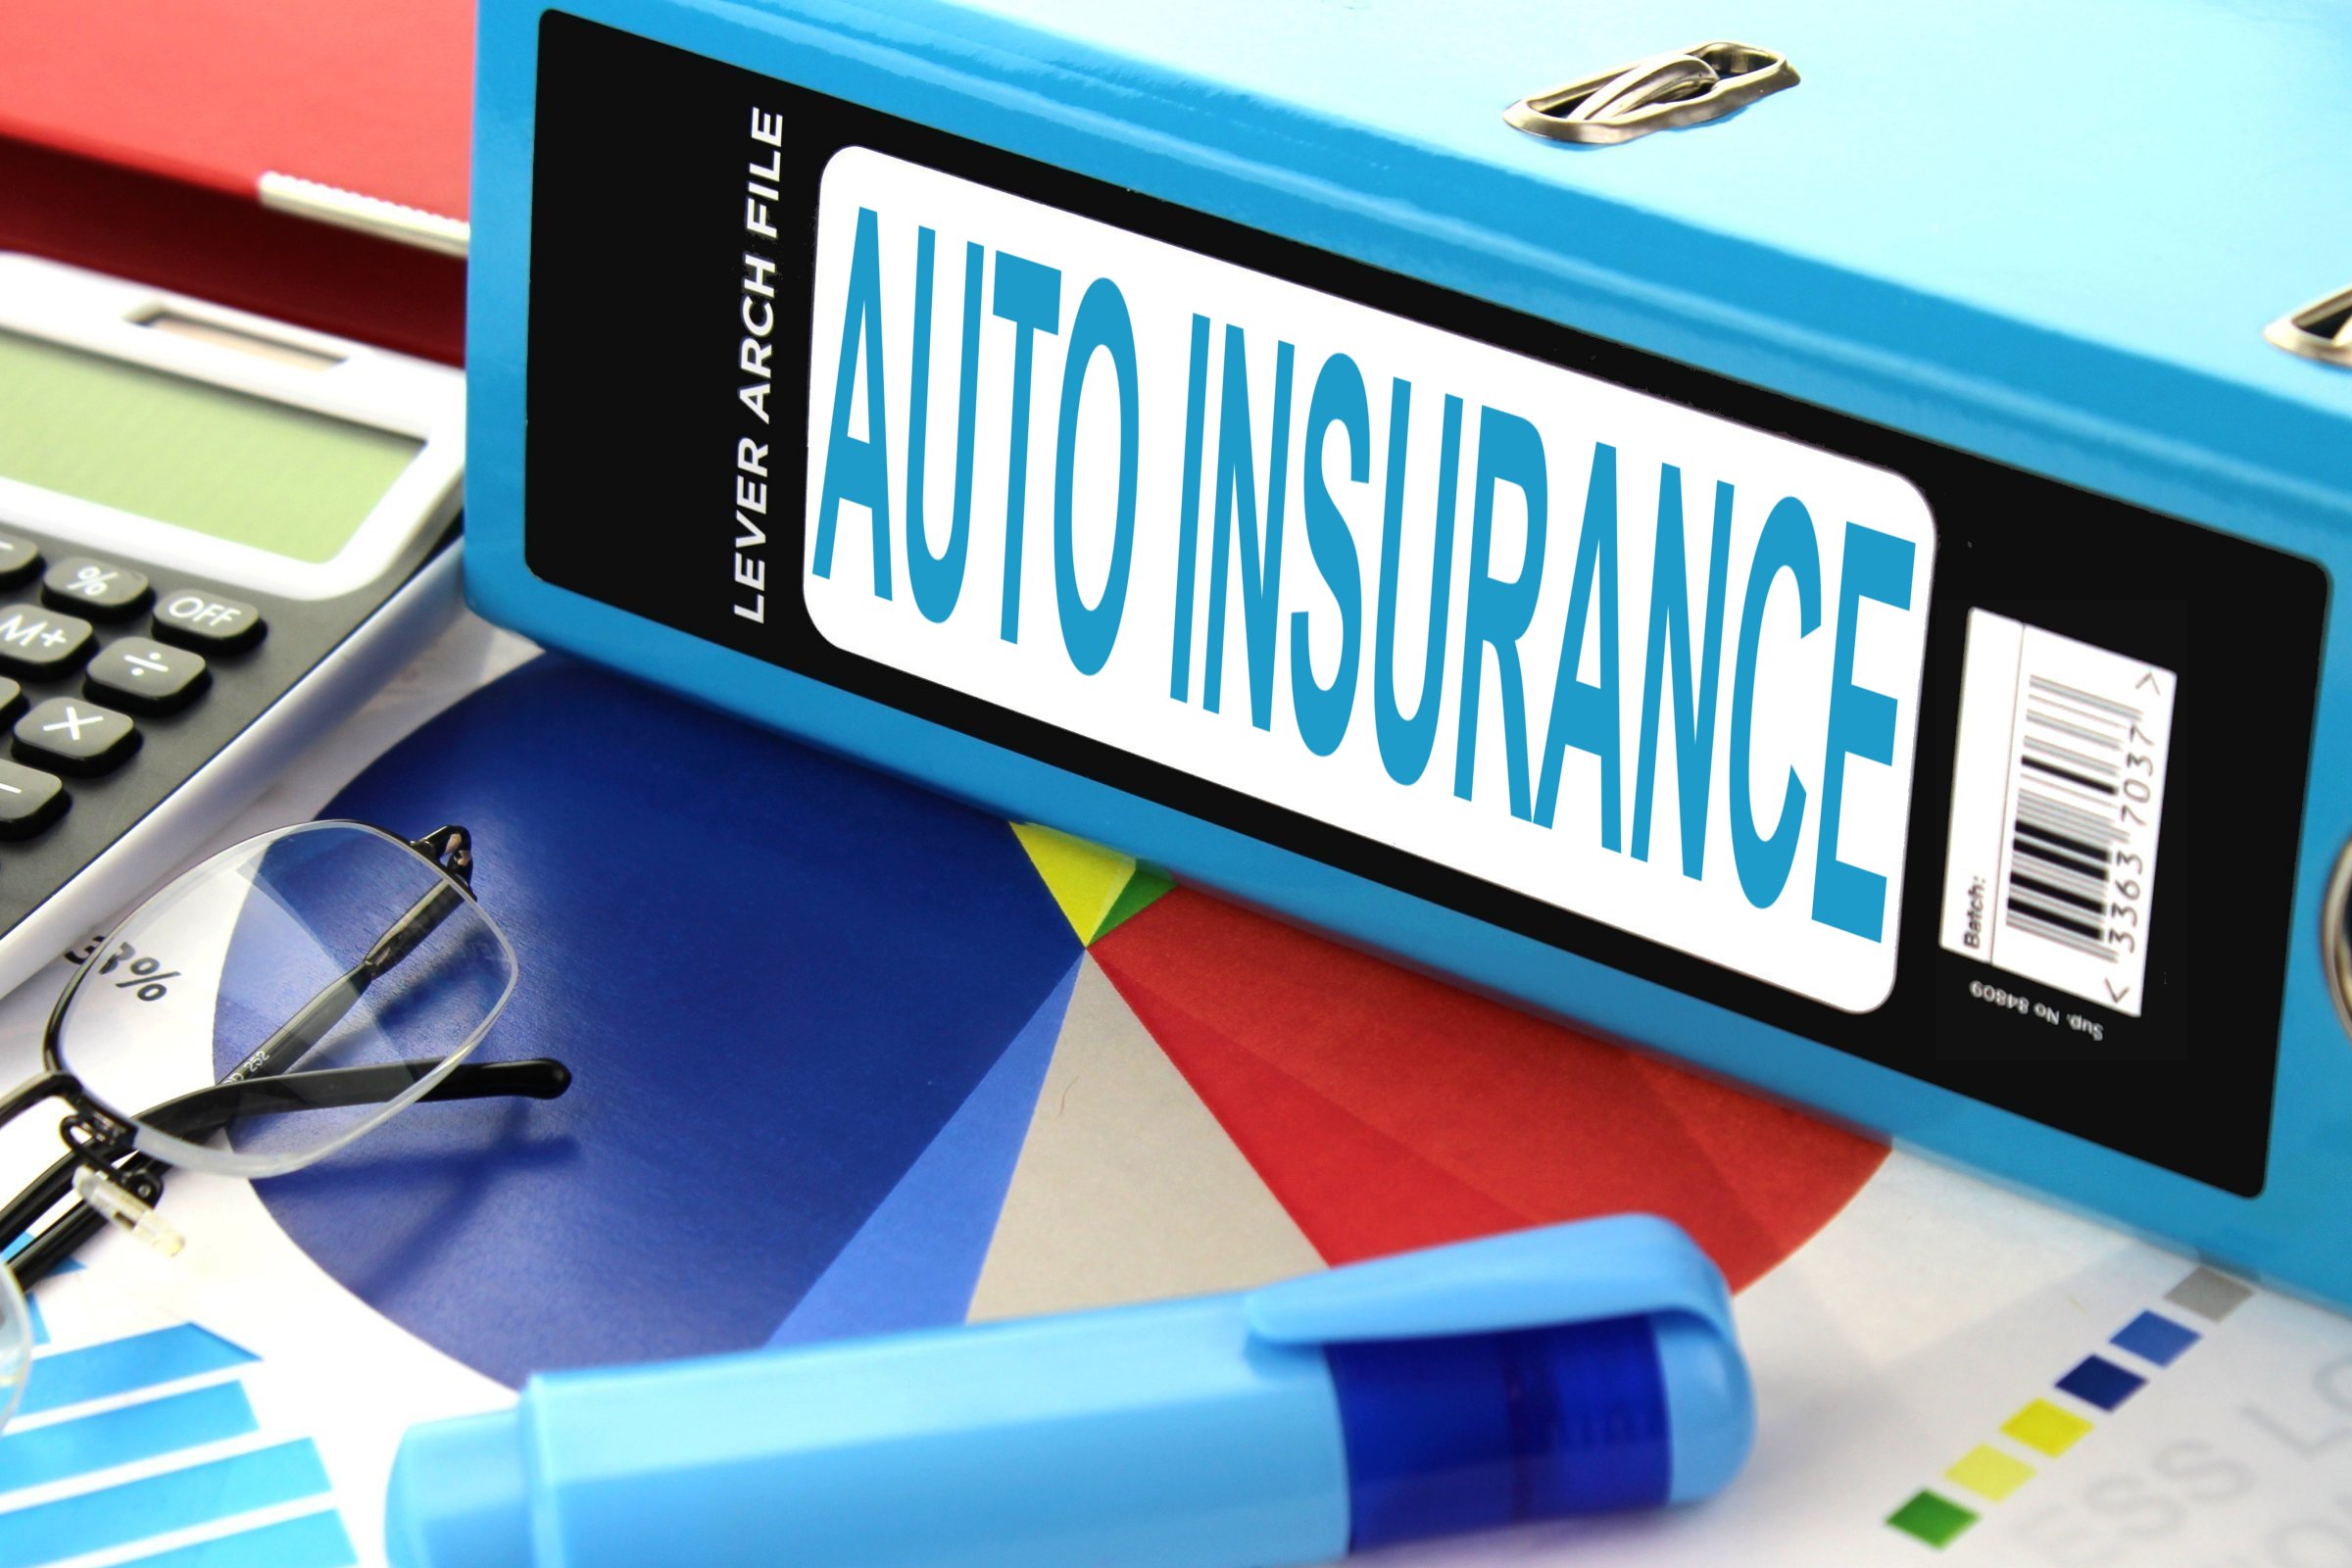 Auto Insurance Free of Charge Creative Commons Lever arch file image